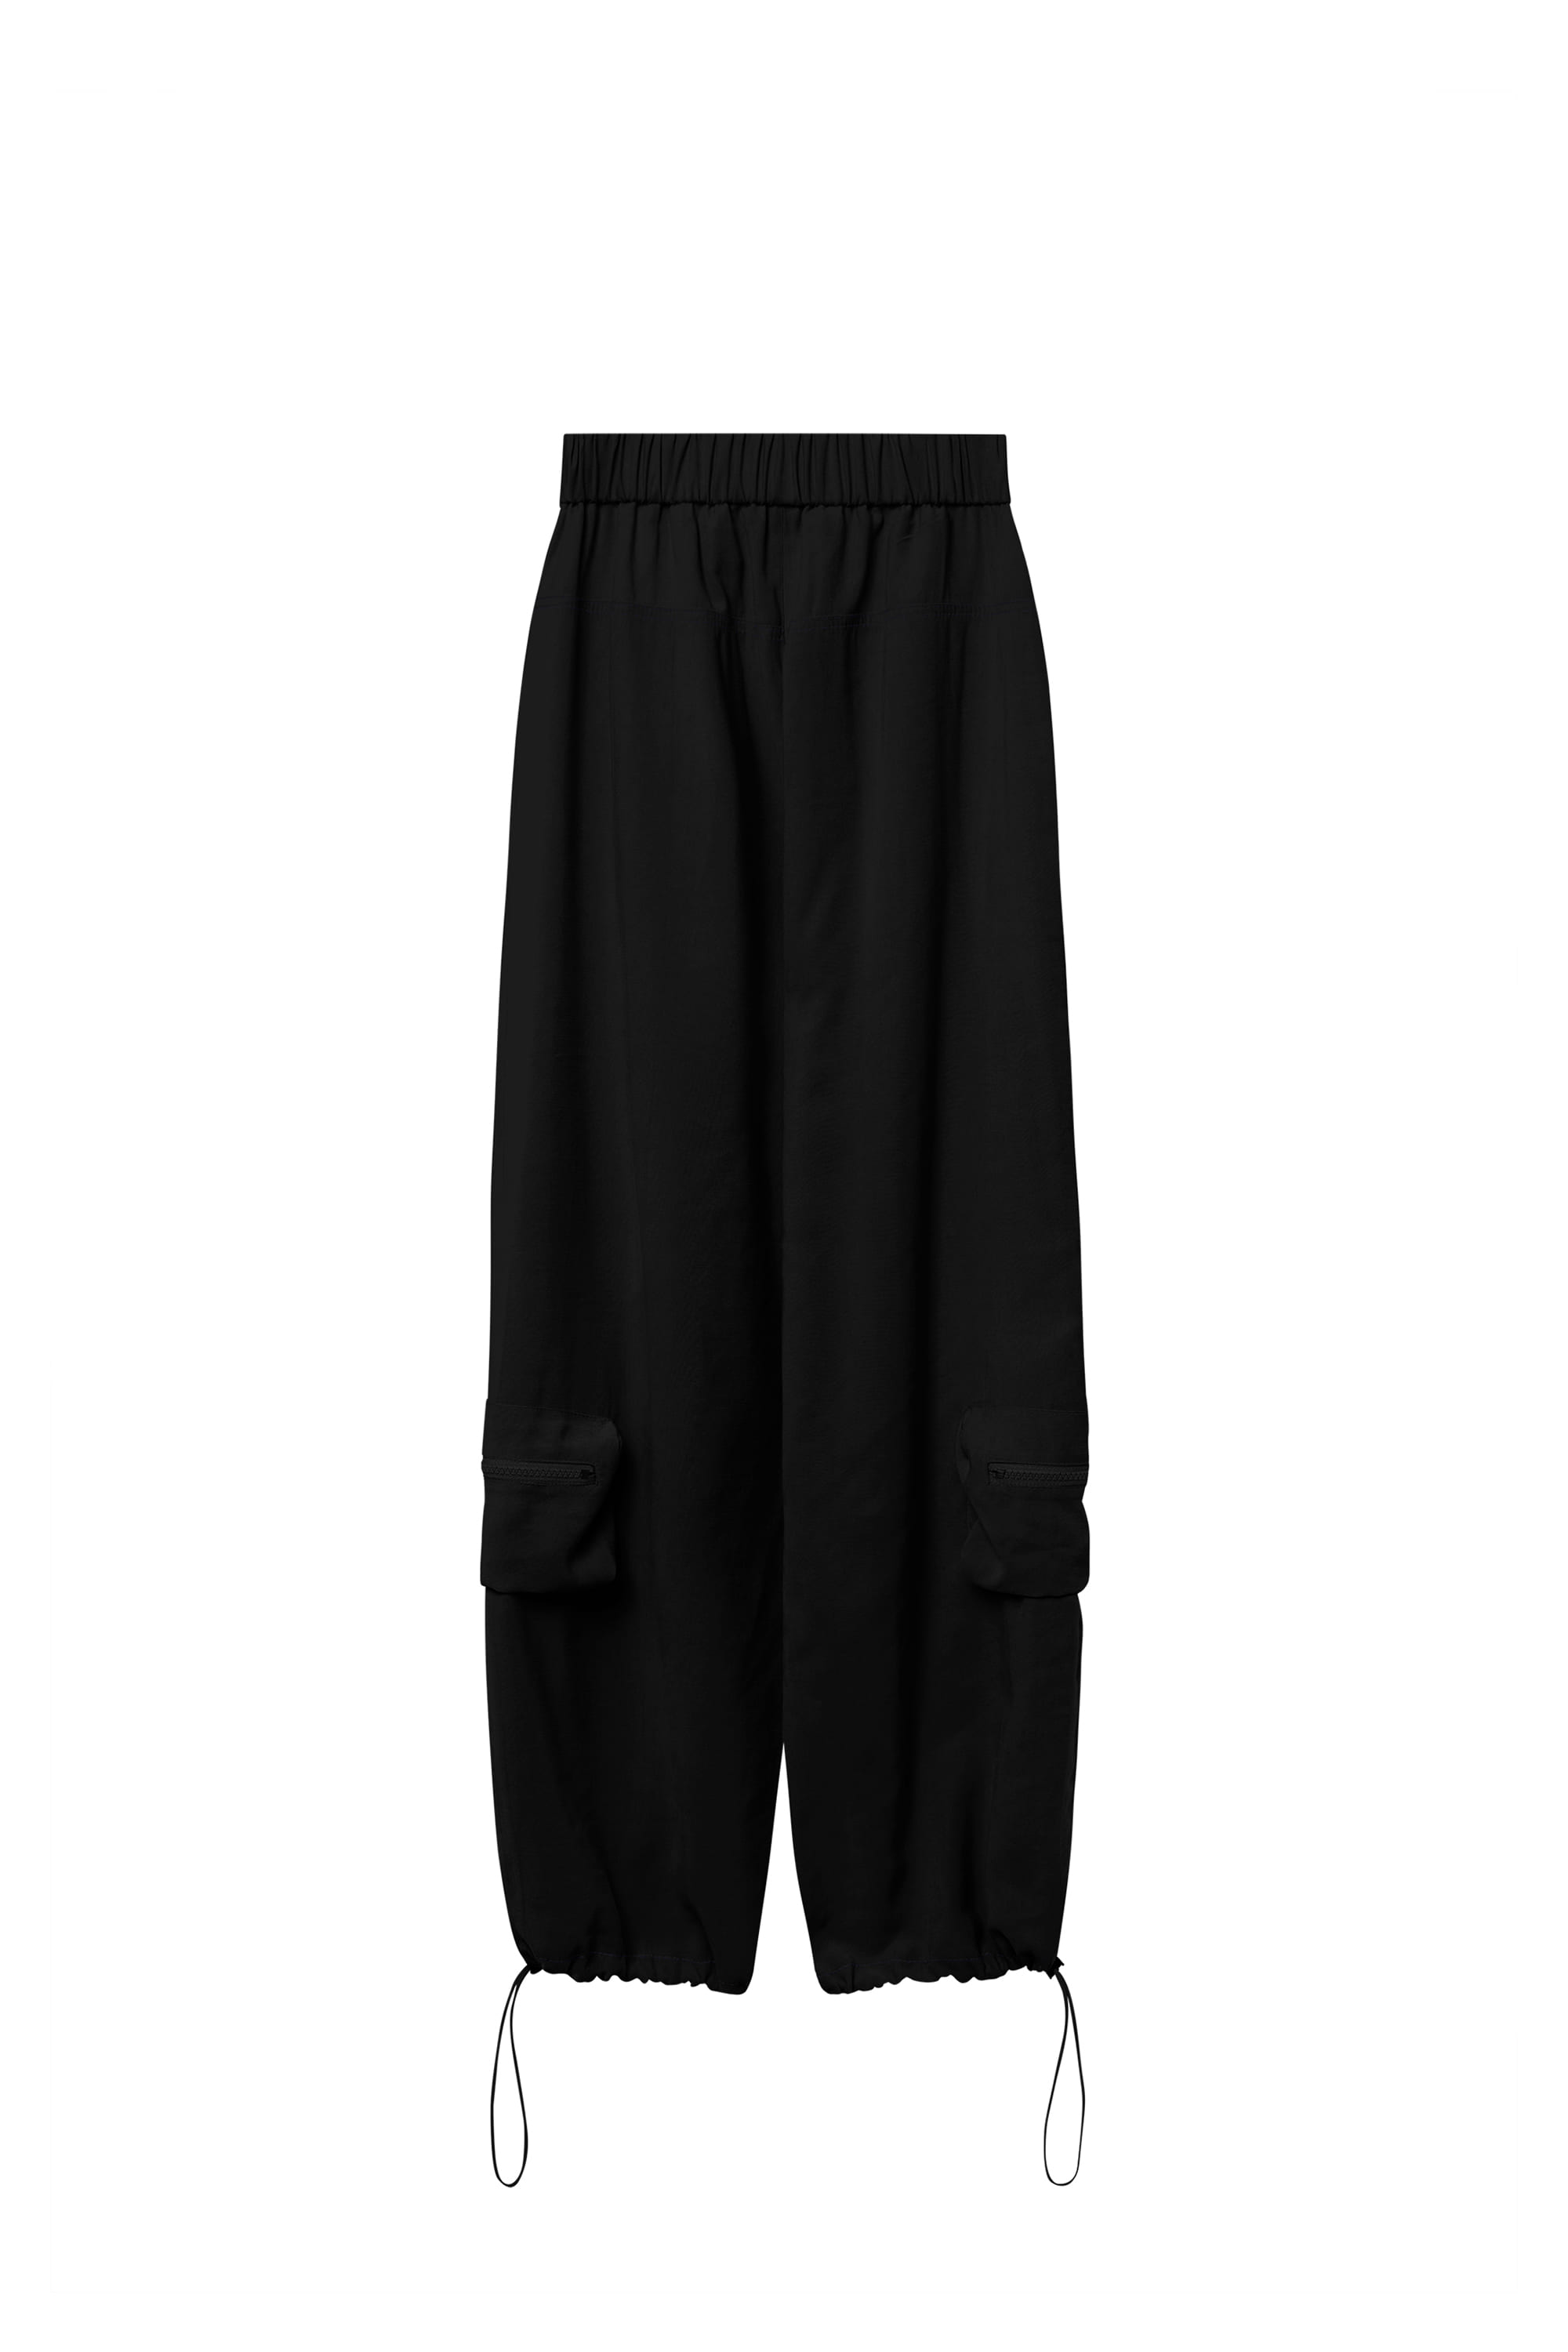 MORE CARGO TROUSERS black